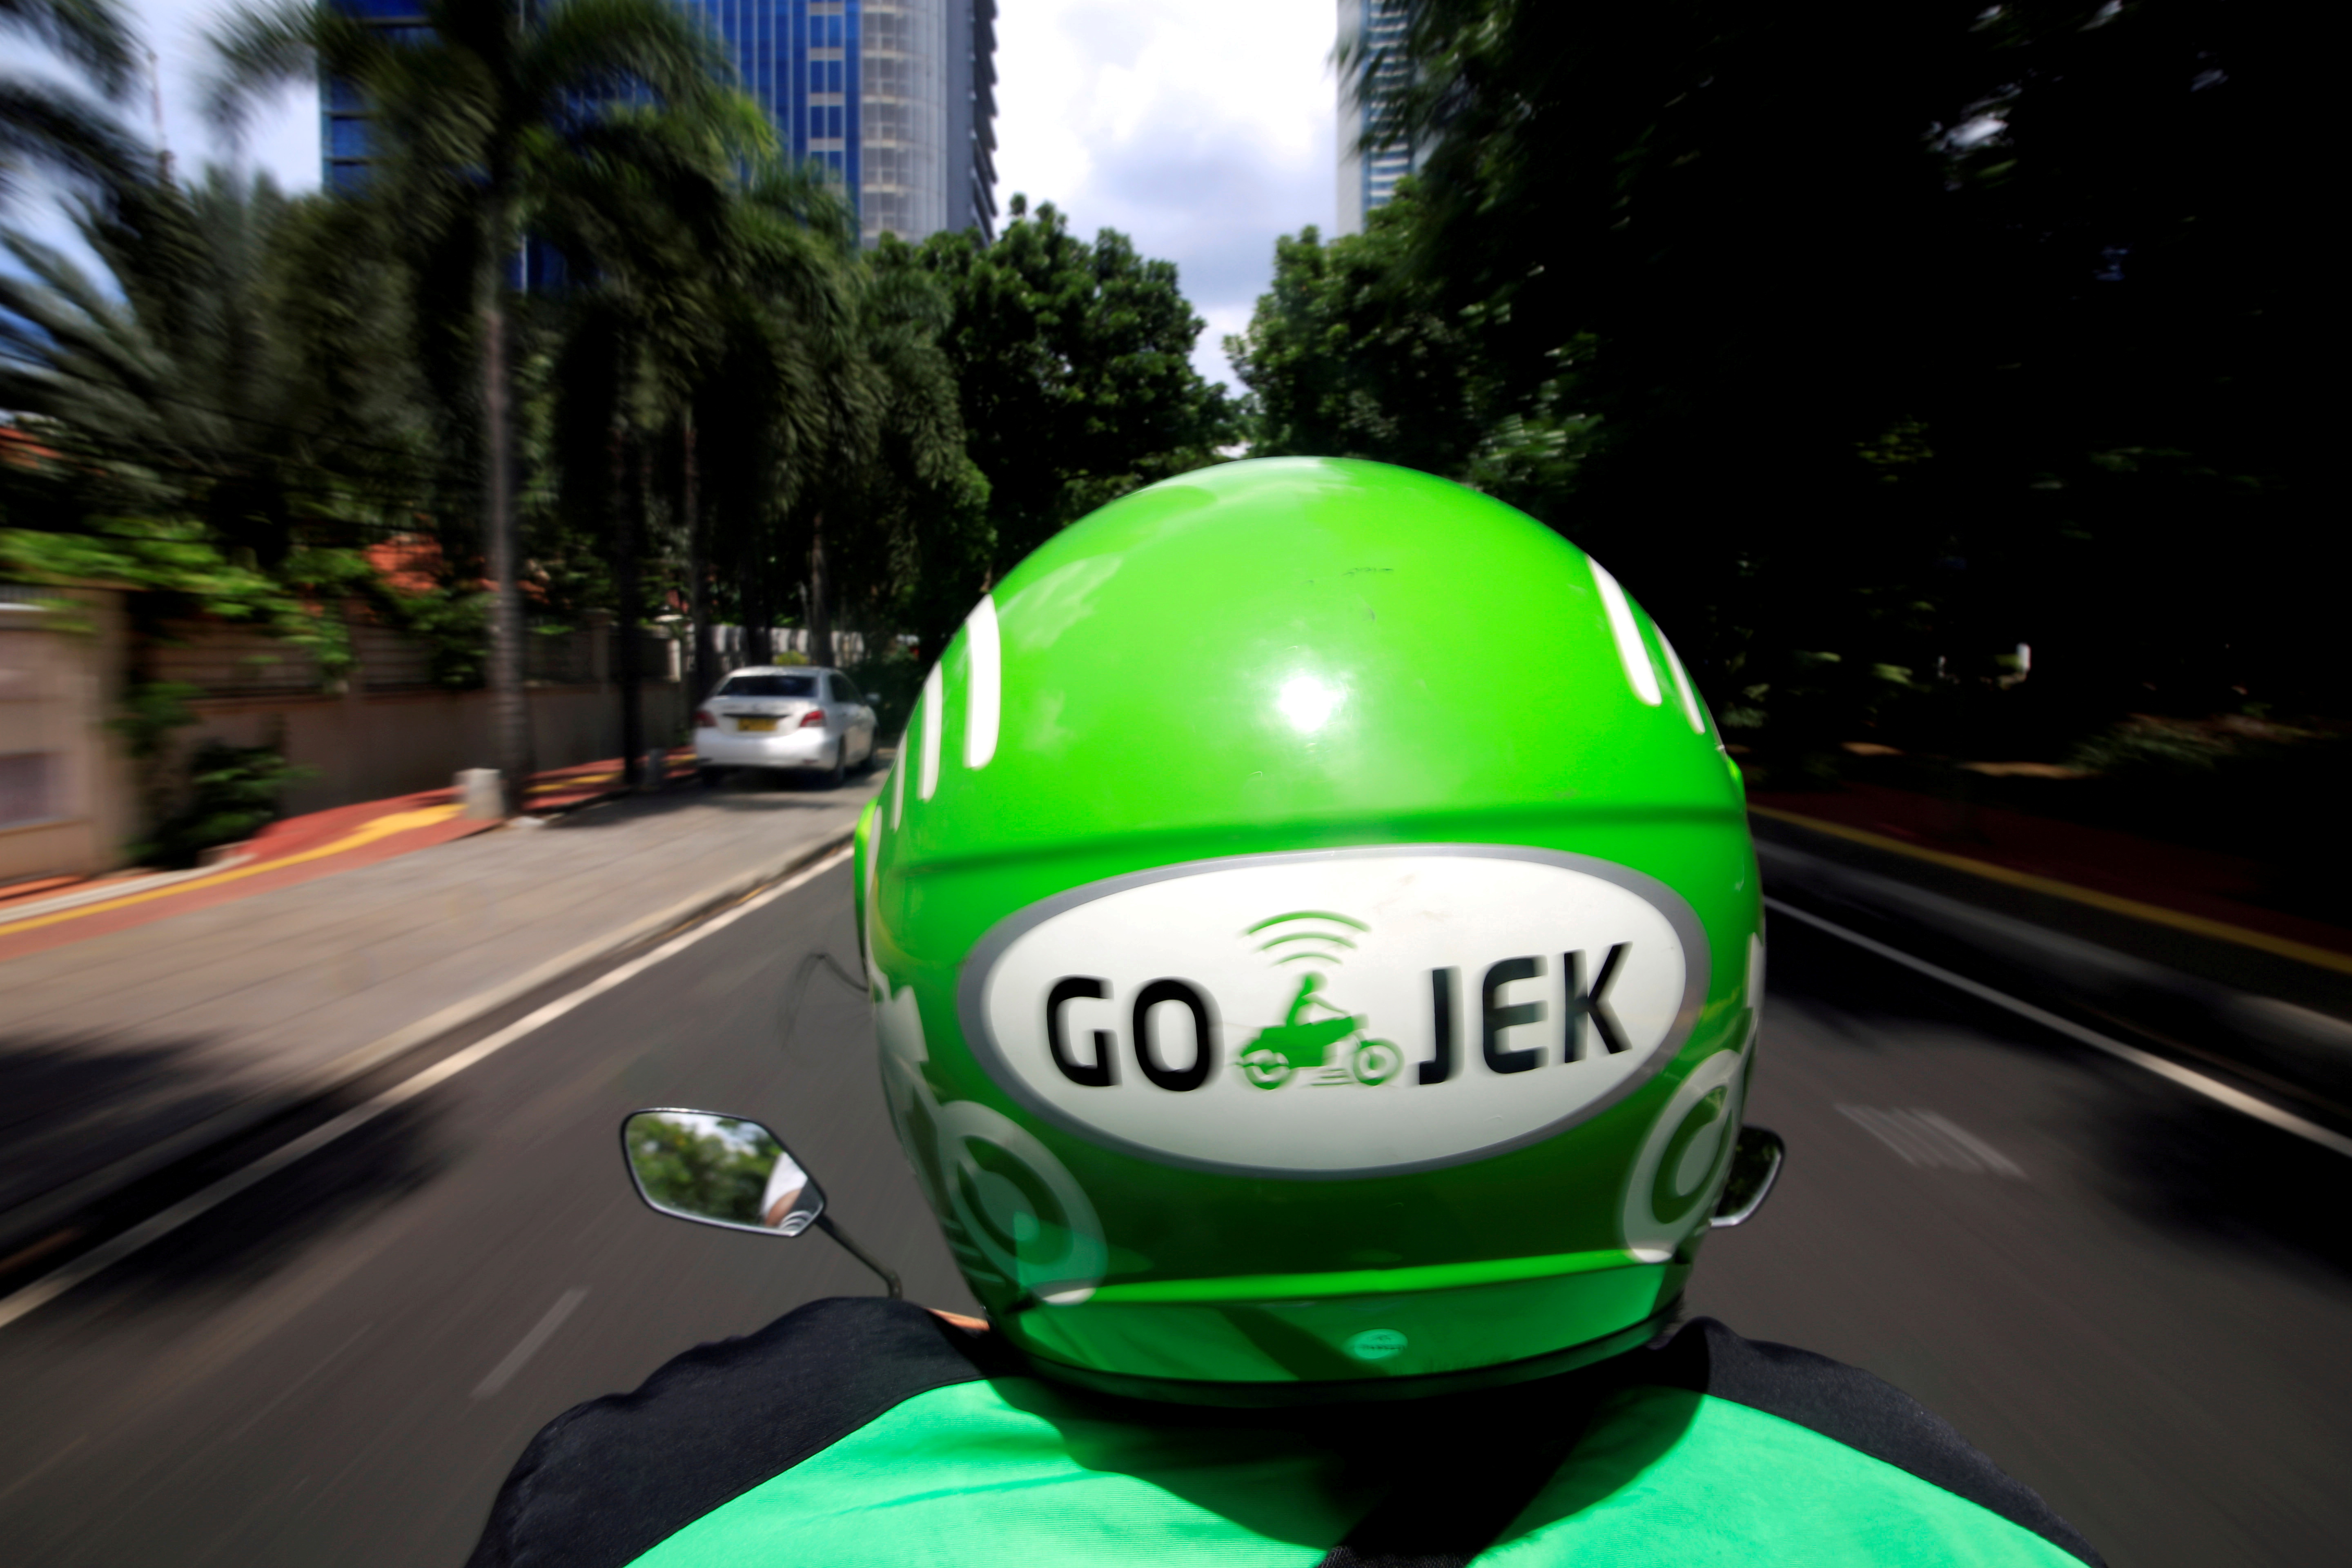 A Go-Jek driver rides a motorcycle on a street in Jakarta, Indonesia, Dec. 15, 2017. REUTERS/Beawiharta/File Photo/File Photo